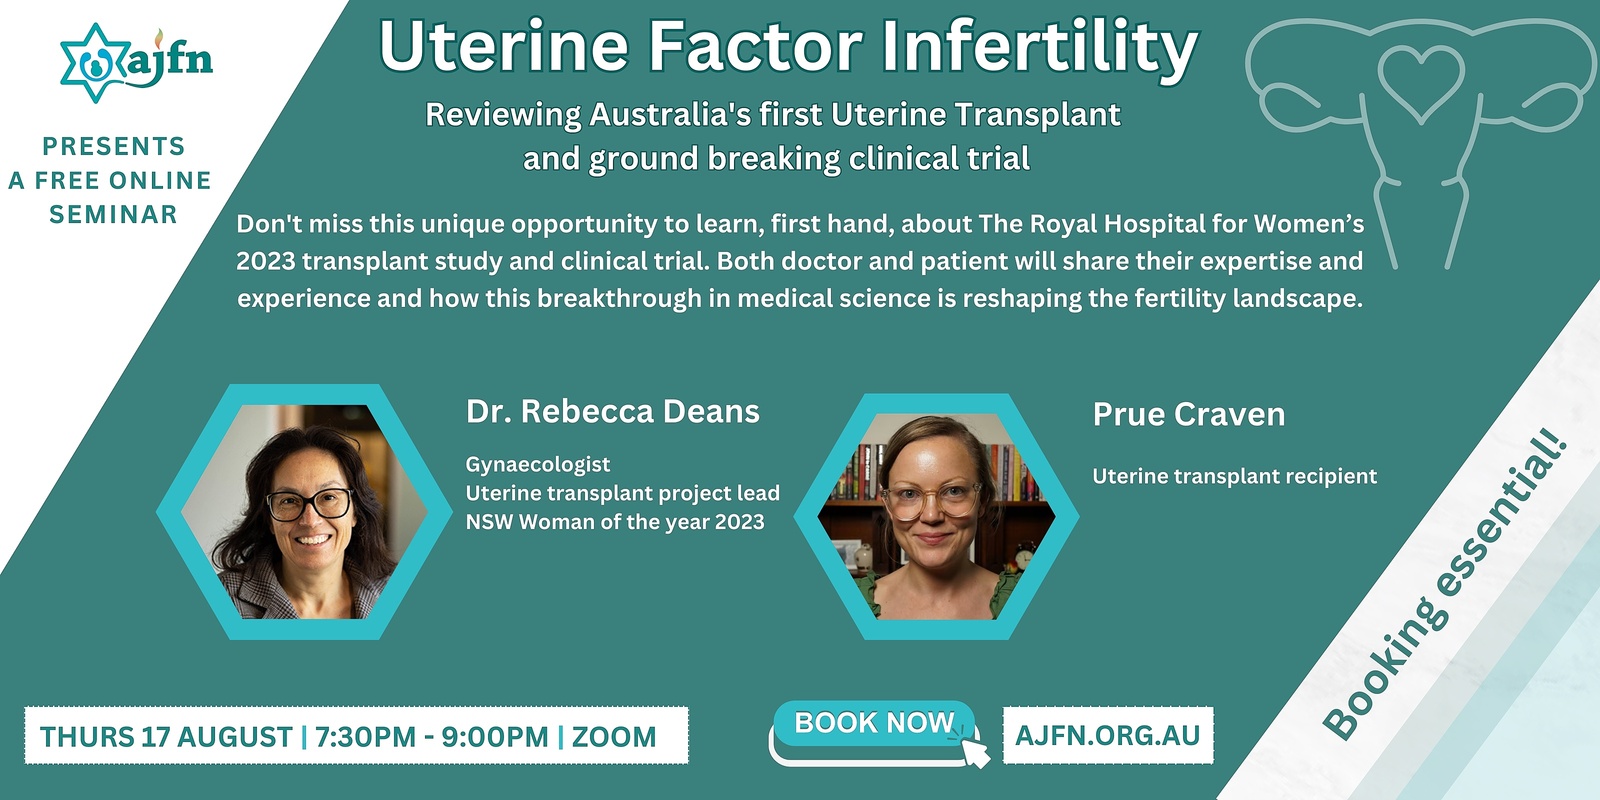 Banner image for Uterine Factor Infertility - Reviewing Australia's first Uterine Transplant & Clinical Trial